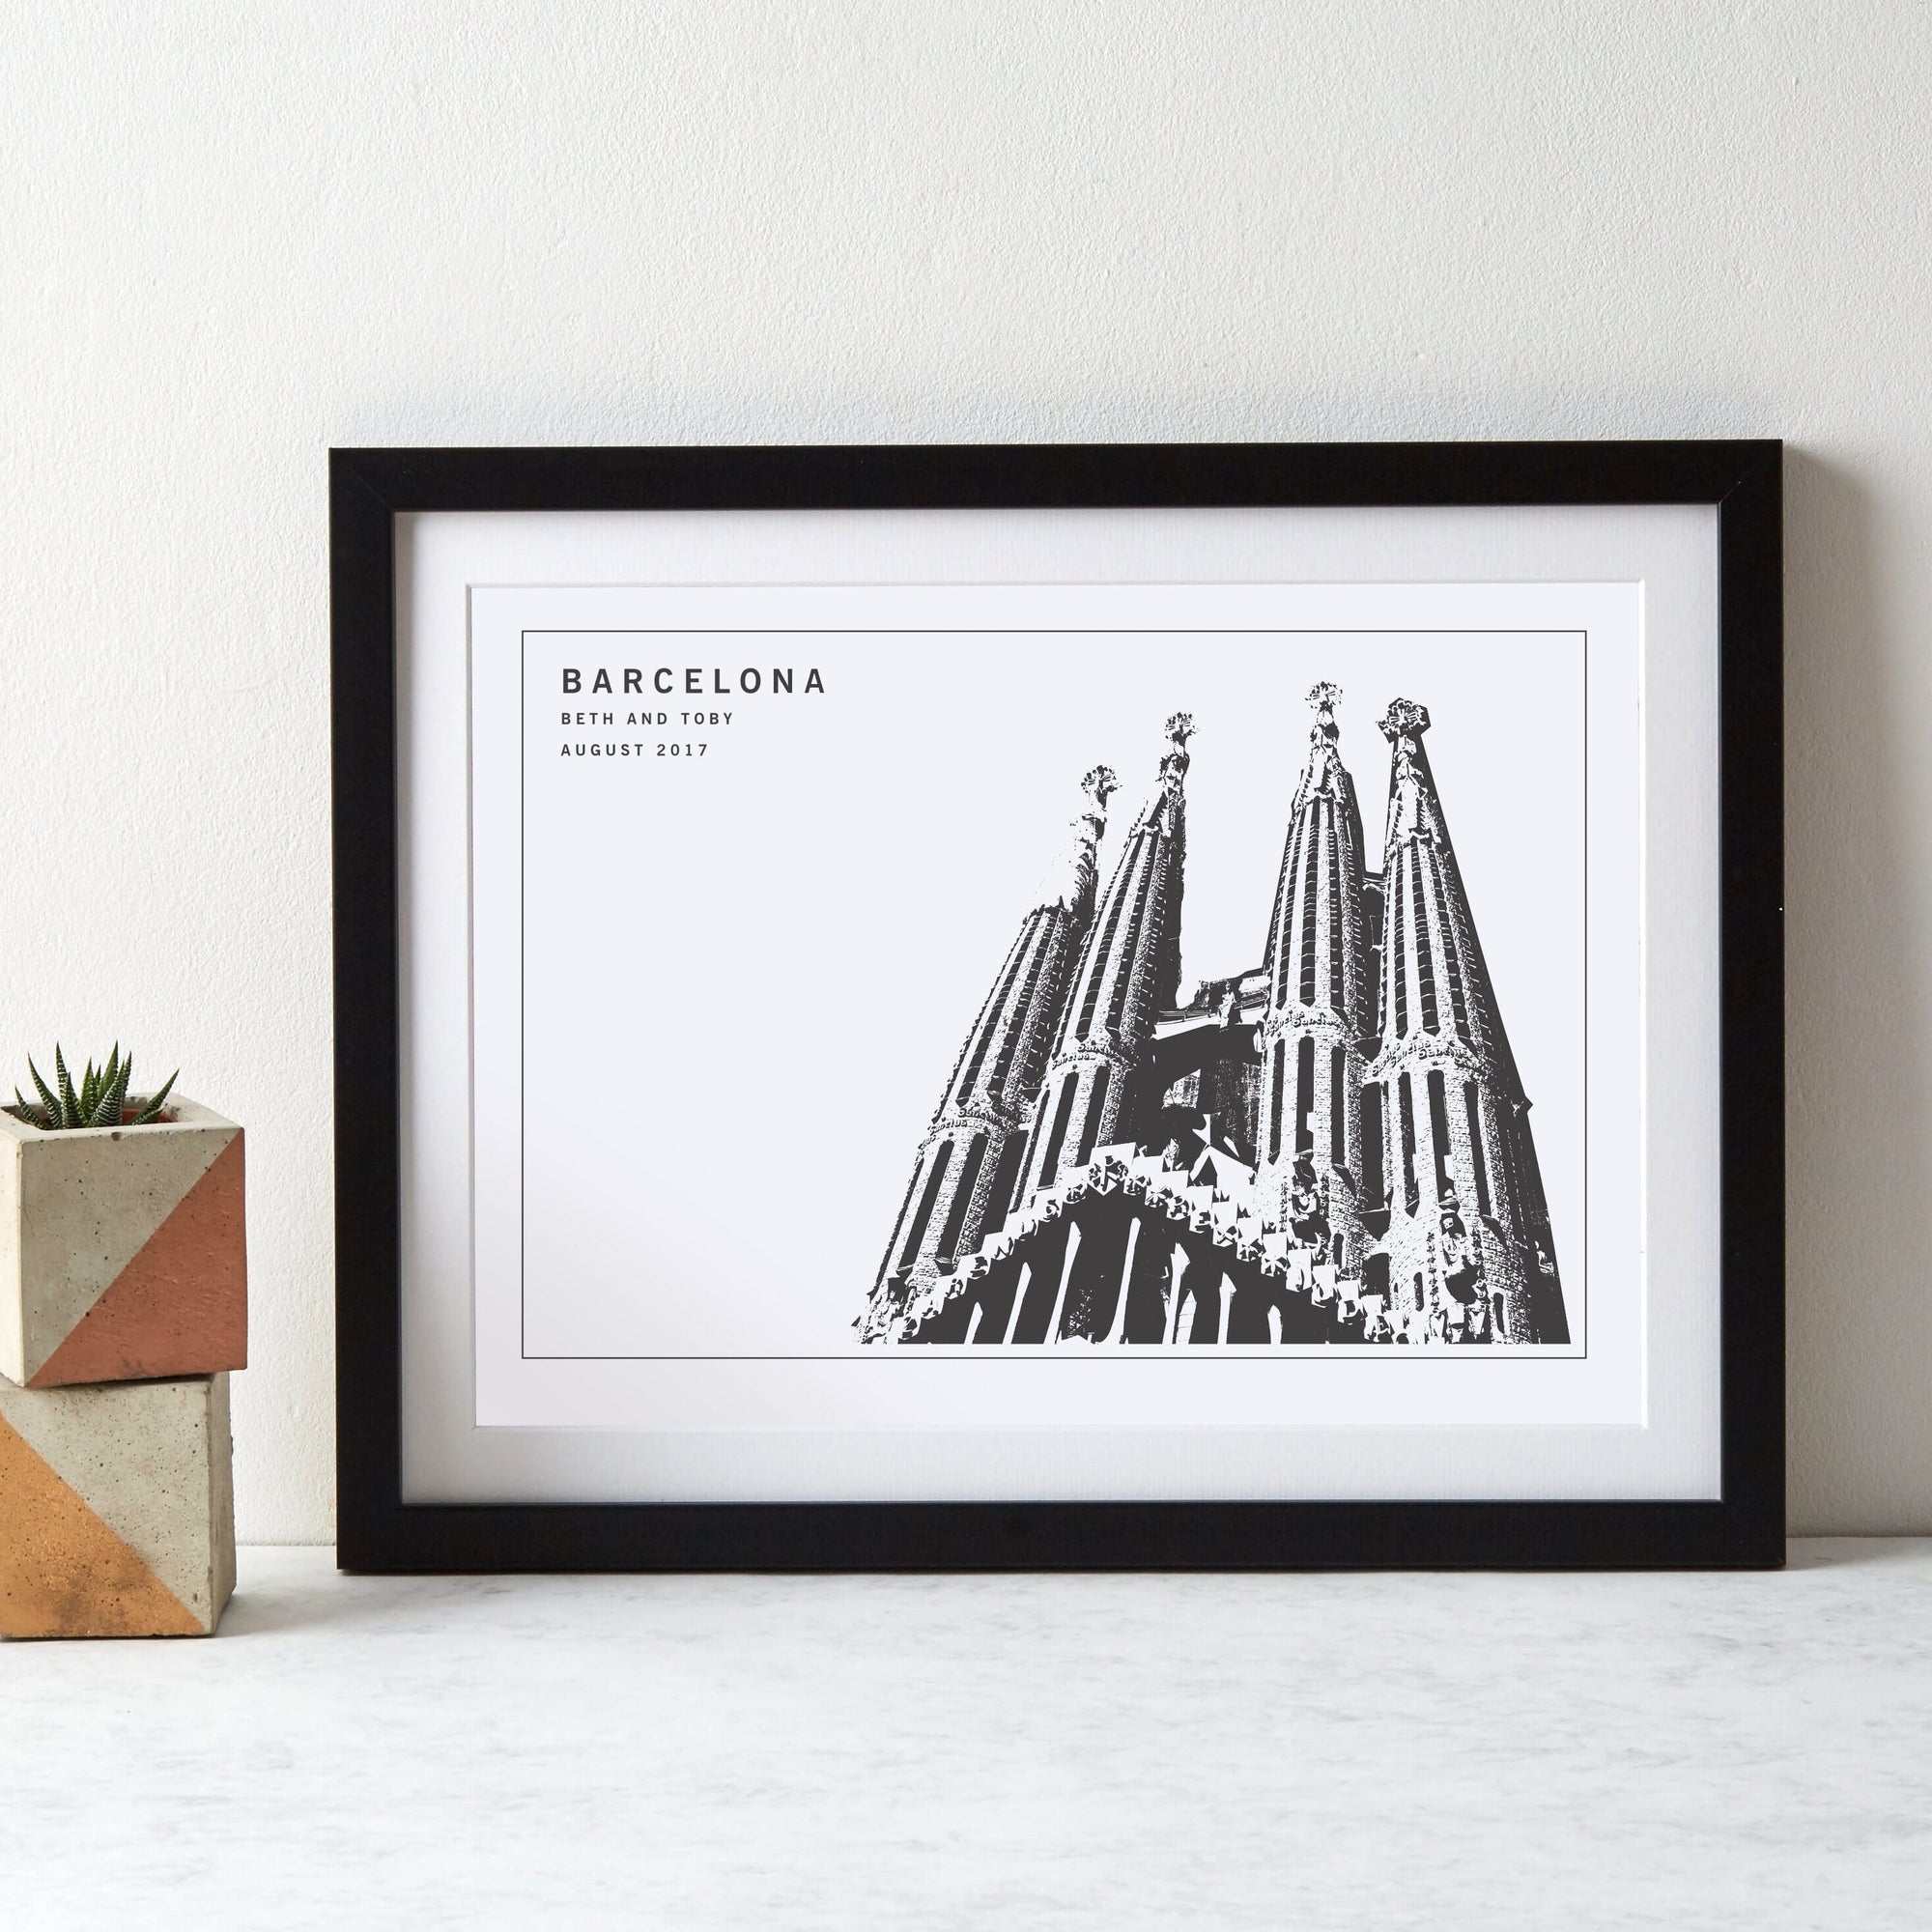 Black framed monochrome personalised graphic image of the cathedral in Barcelona